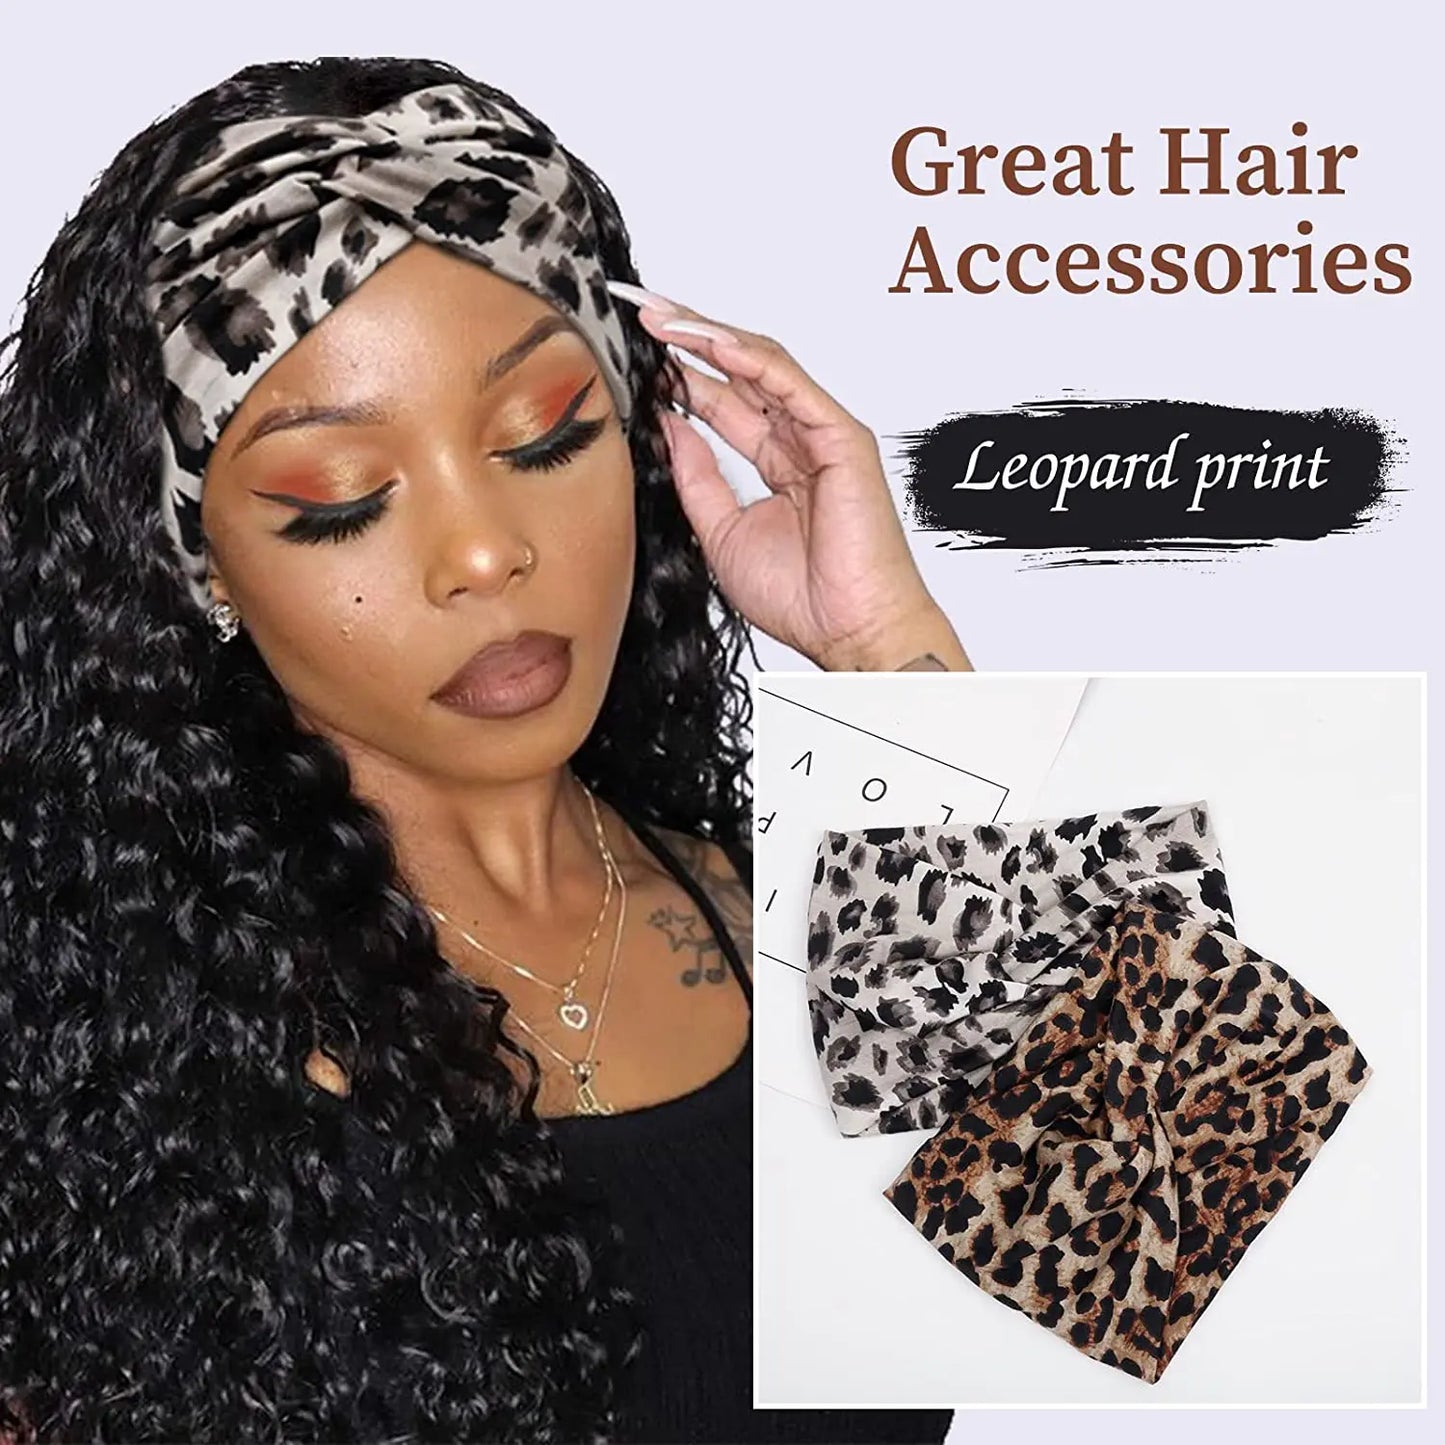 Yoga Headbands For Women's Hair Wide Thick Stretchy Boho African Turban Knotted Leopard Head Bands